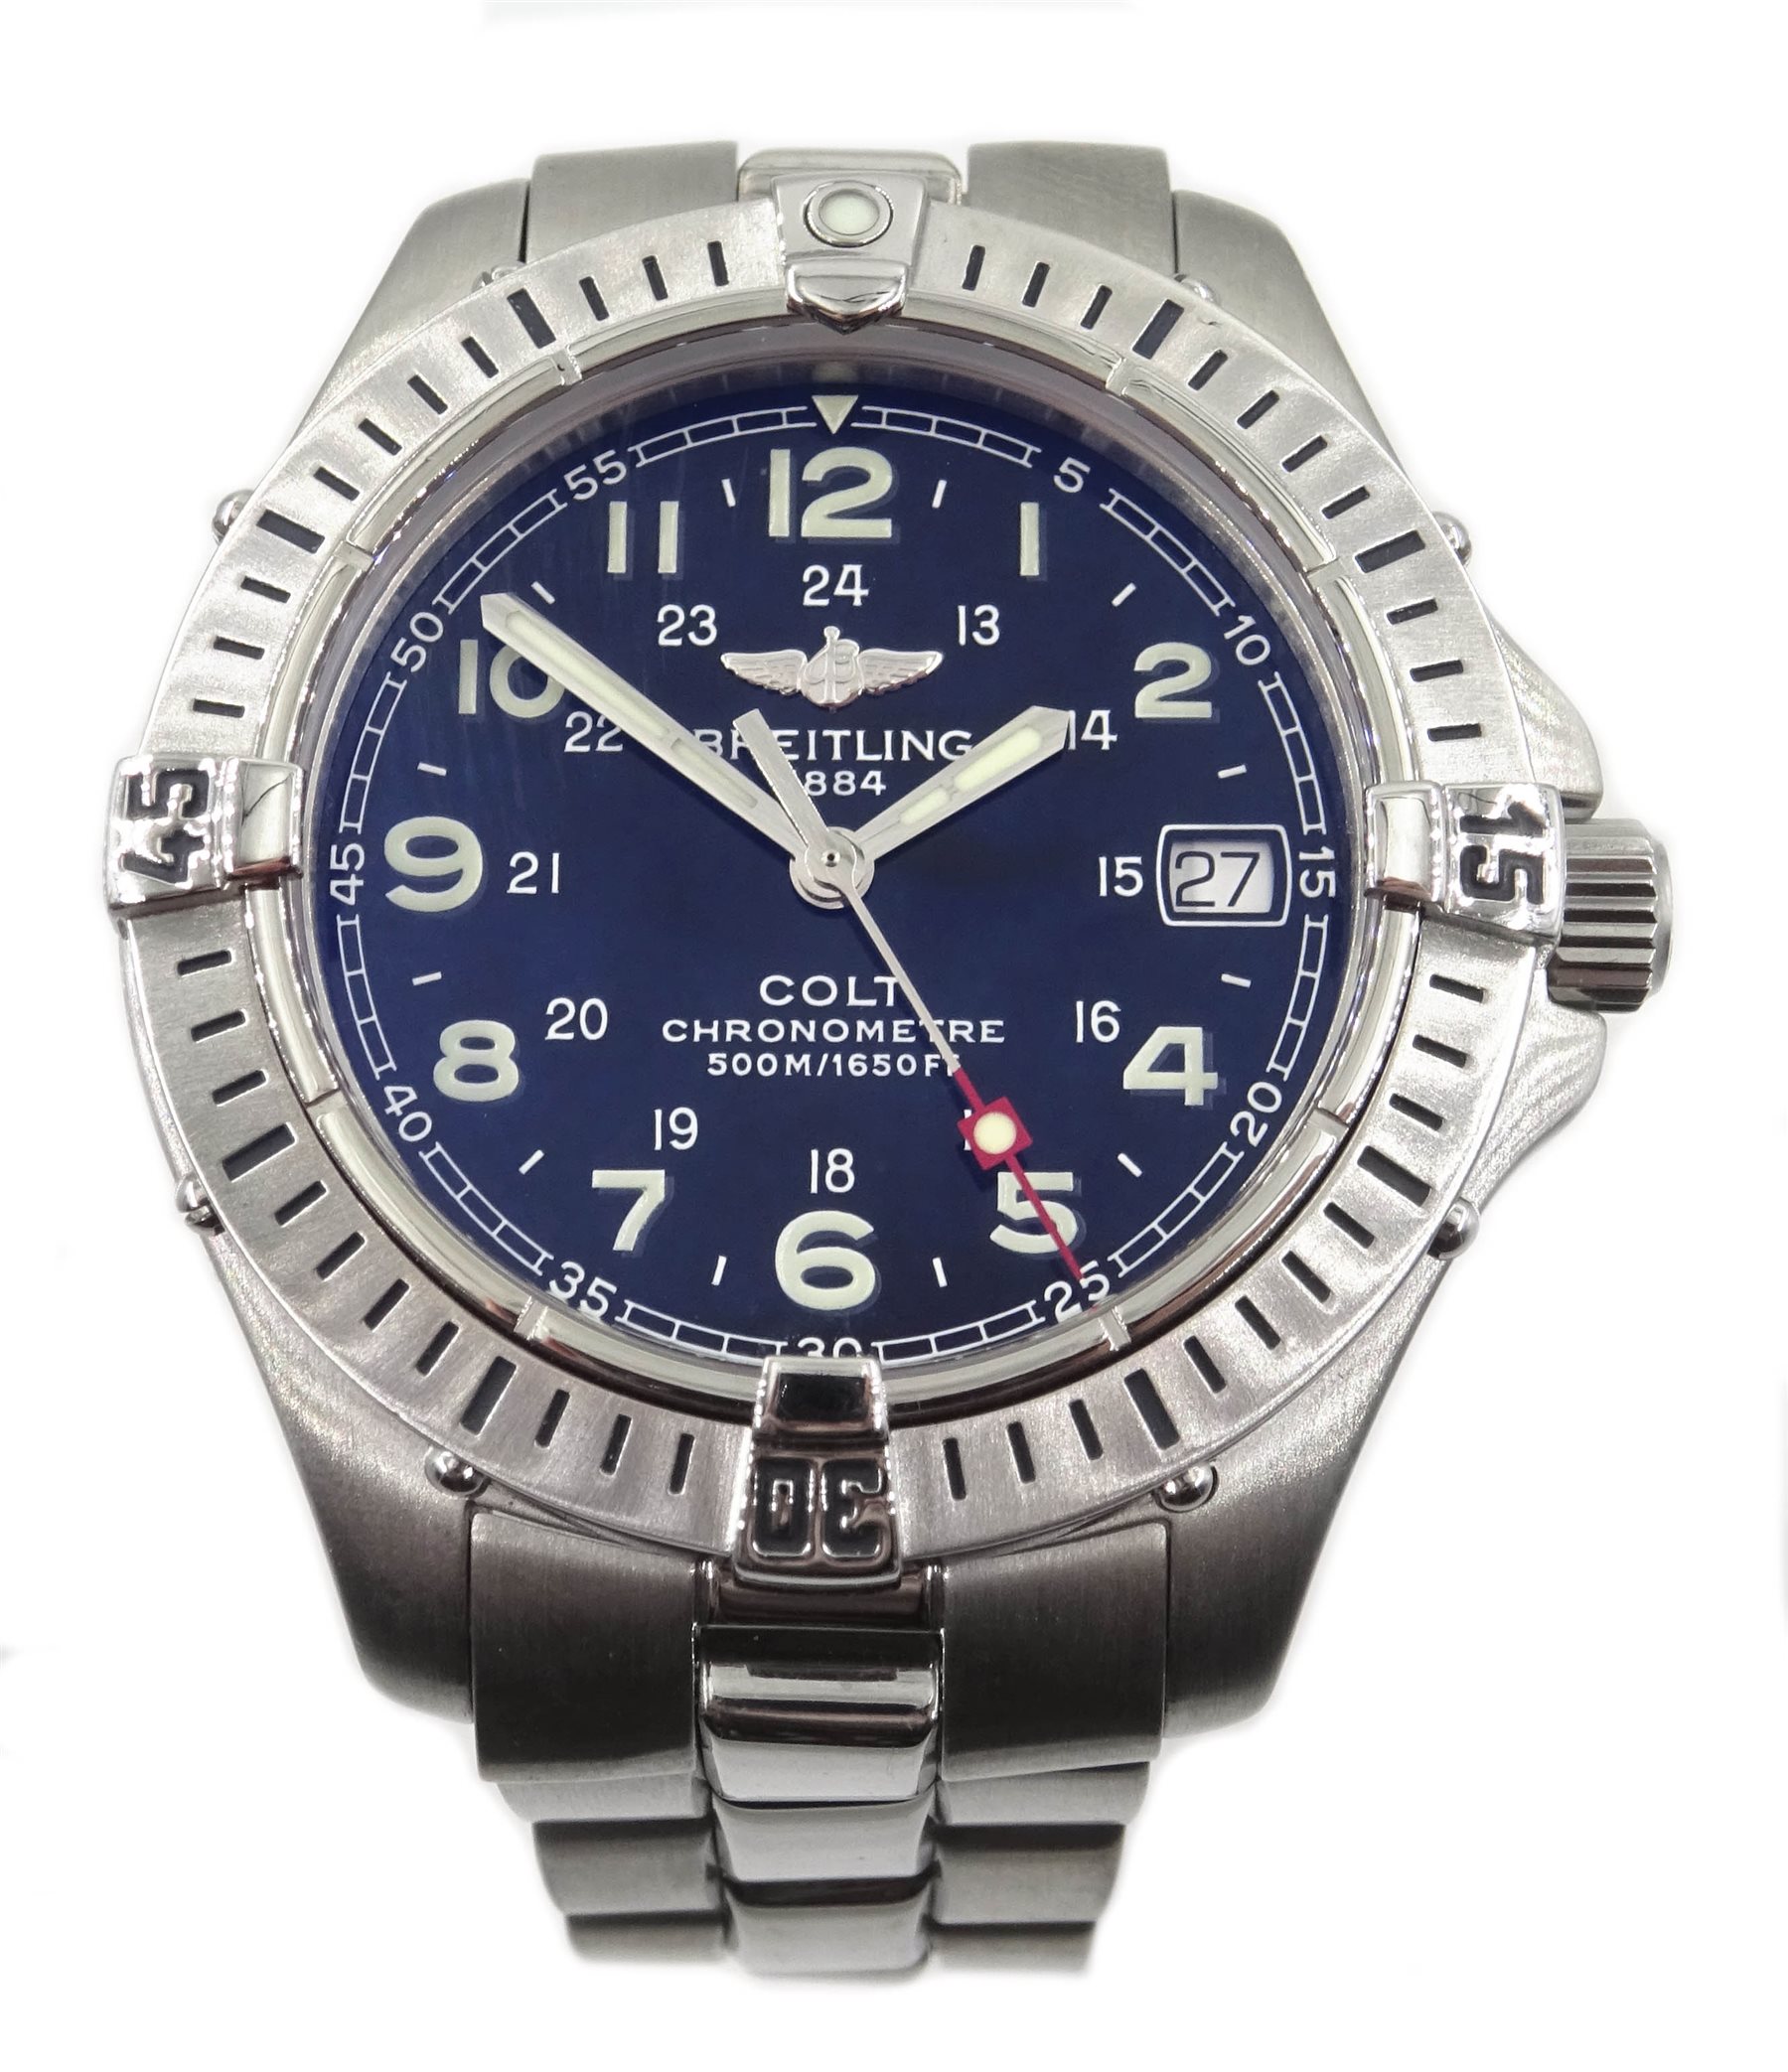 Breitling 1884 Colt chronometre stainless steel mid-size stainless ...